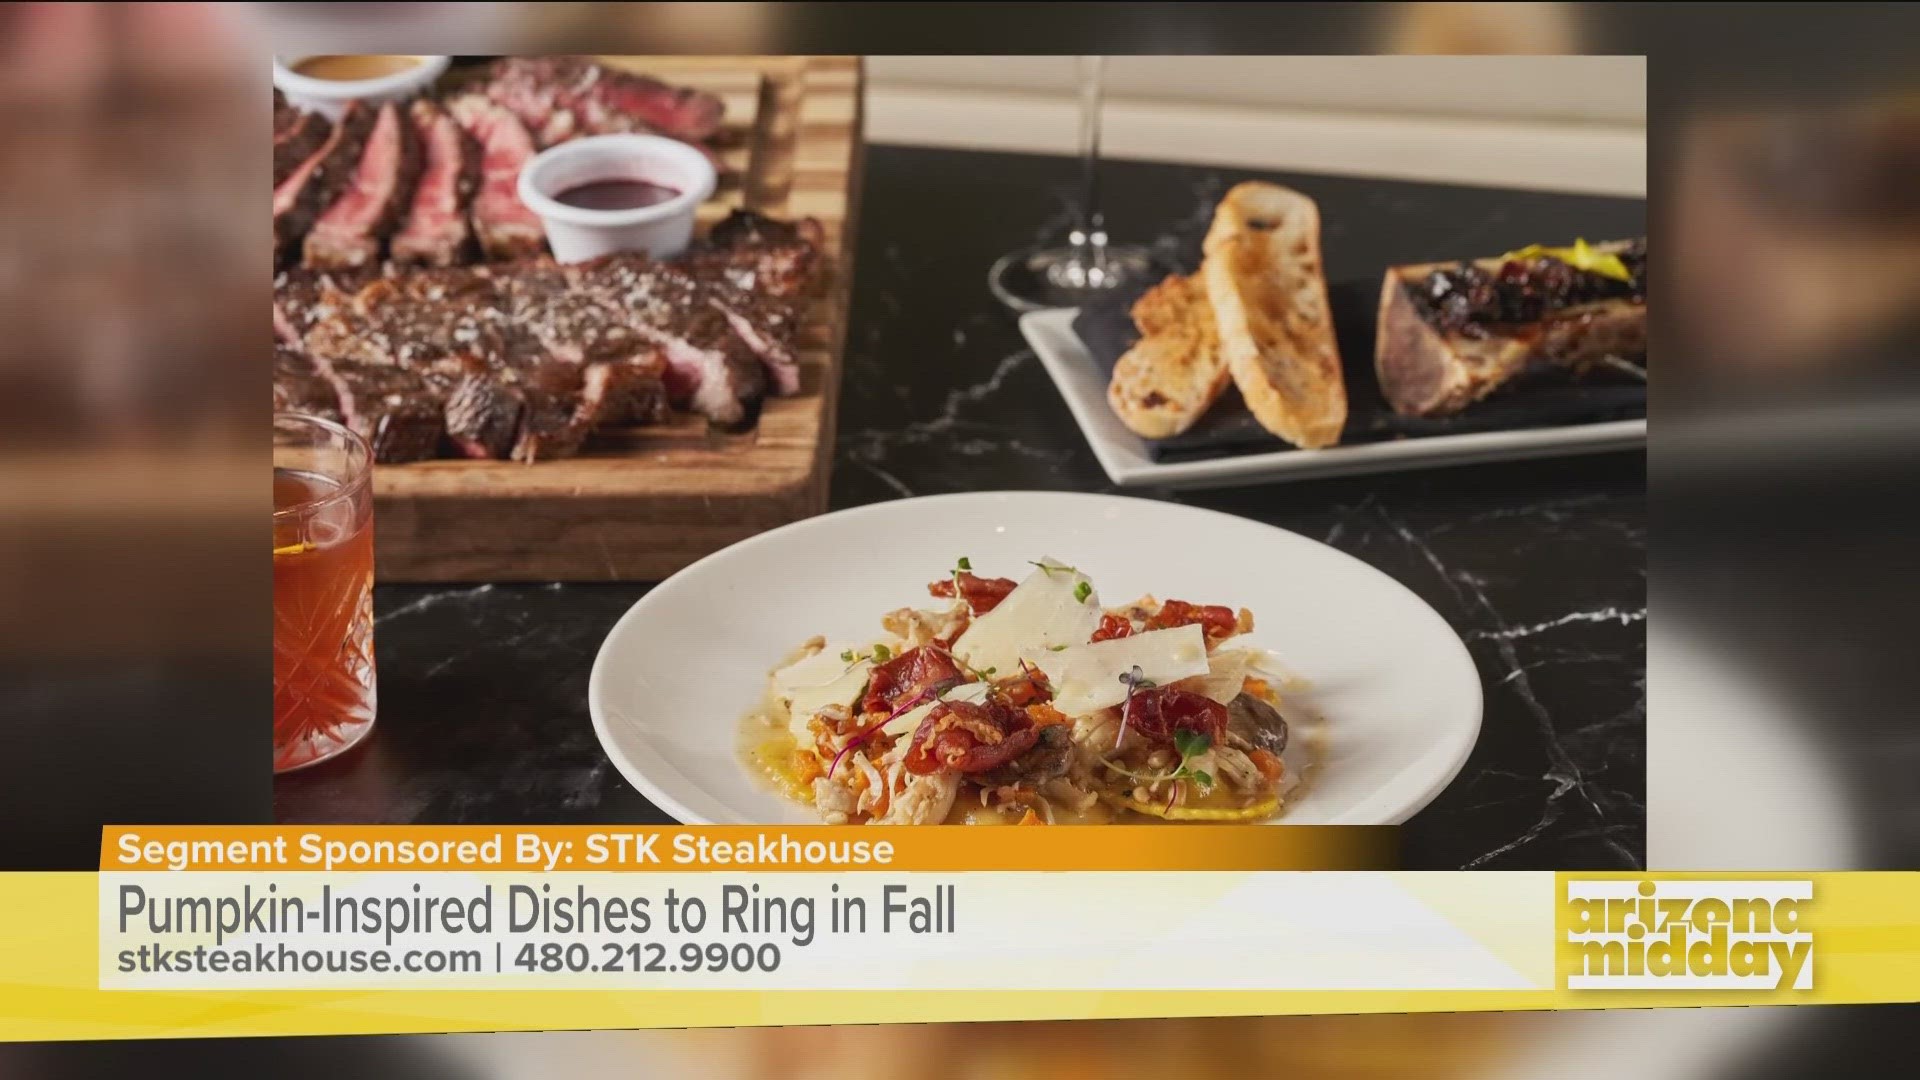 STK Steakhouse stops by our Midday kitchen to show us some "gourd" recipes perfect for Fall.